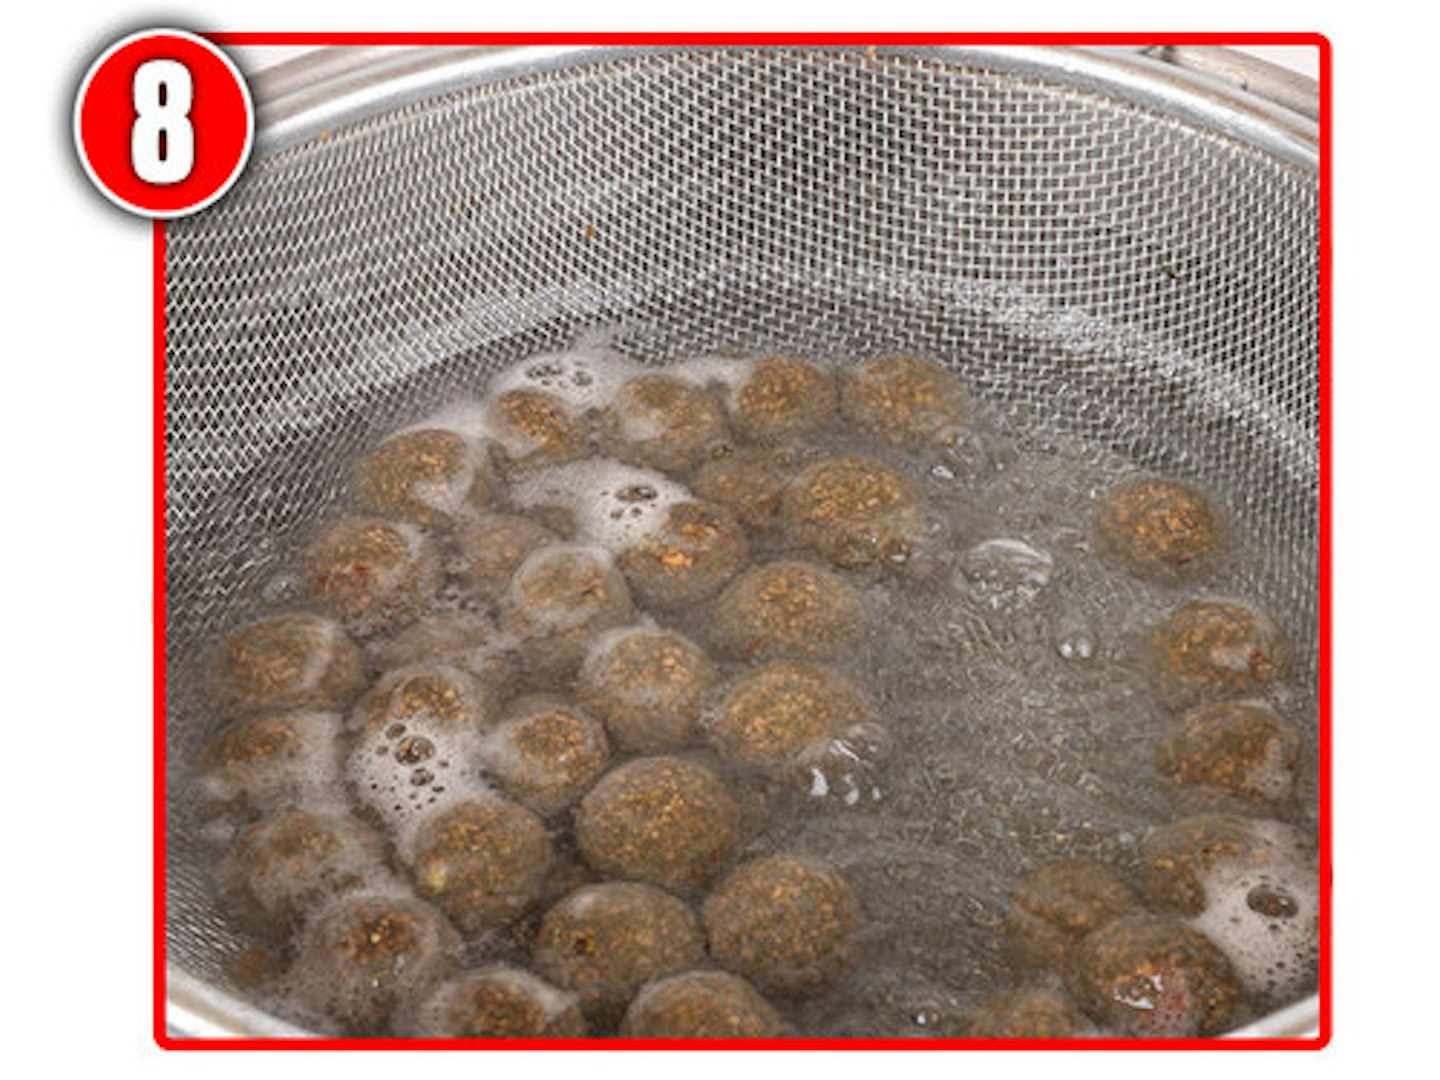 Boil the baits for around one minute to give them a tough outer skin. 